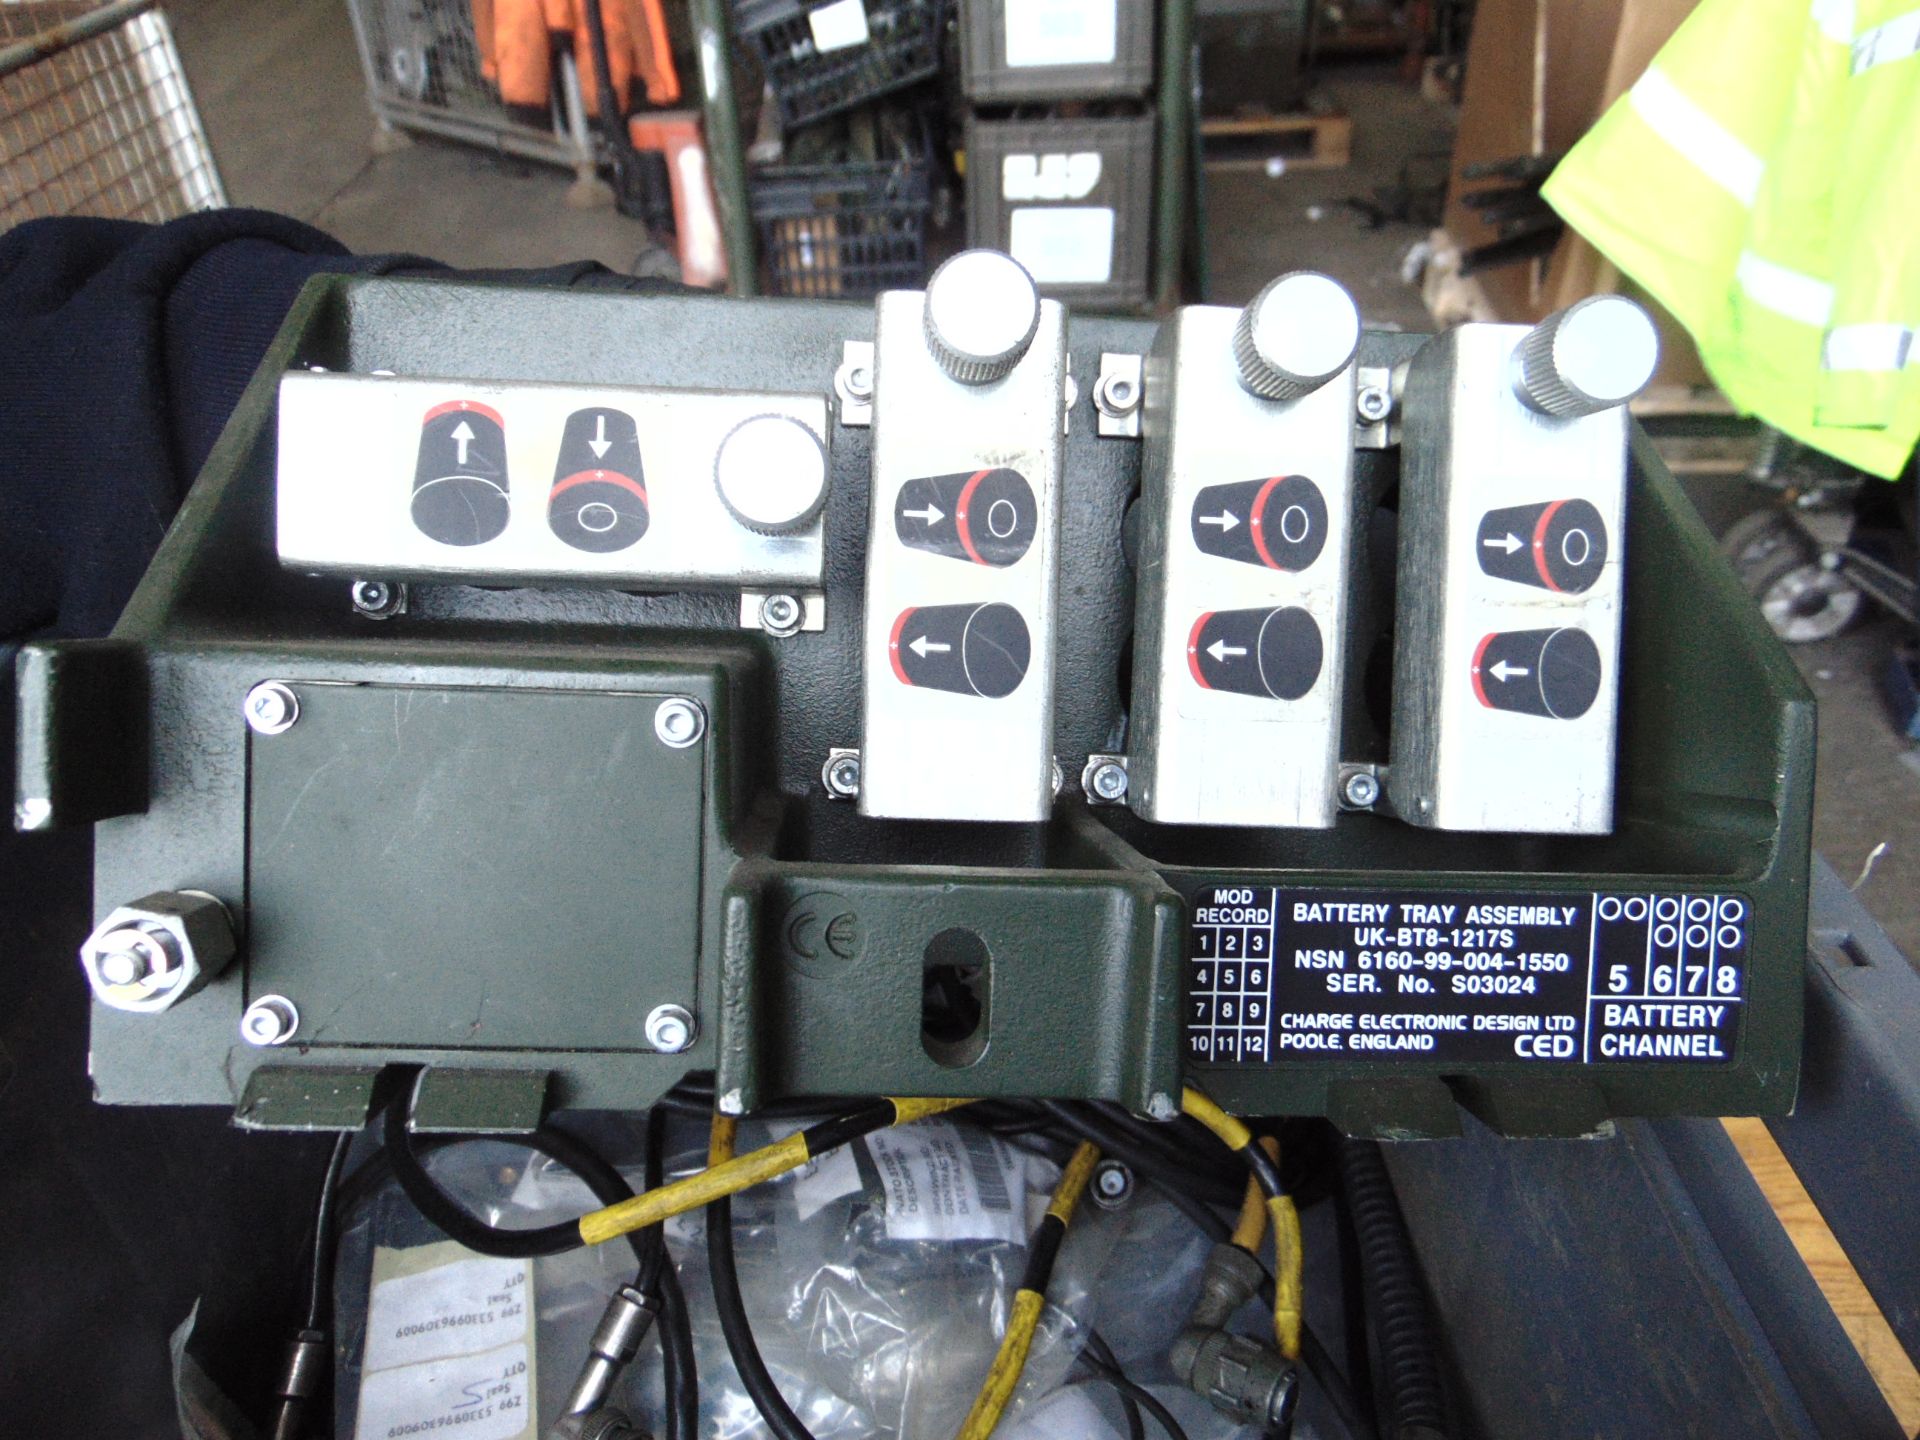 Clansman Radio Cables, Battery Charger ect - Image 2 of 5